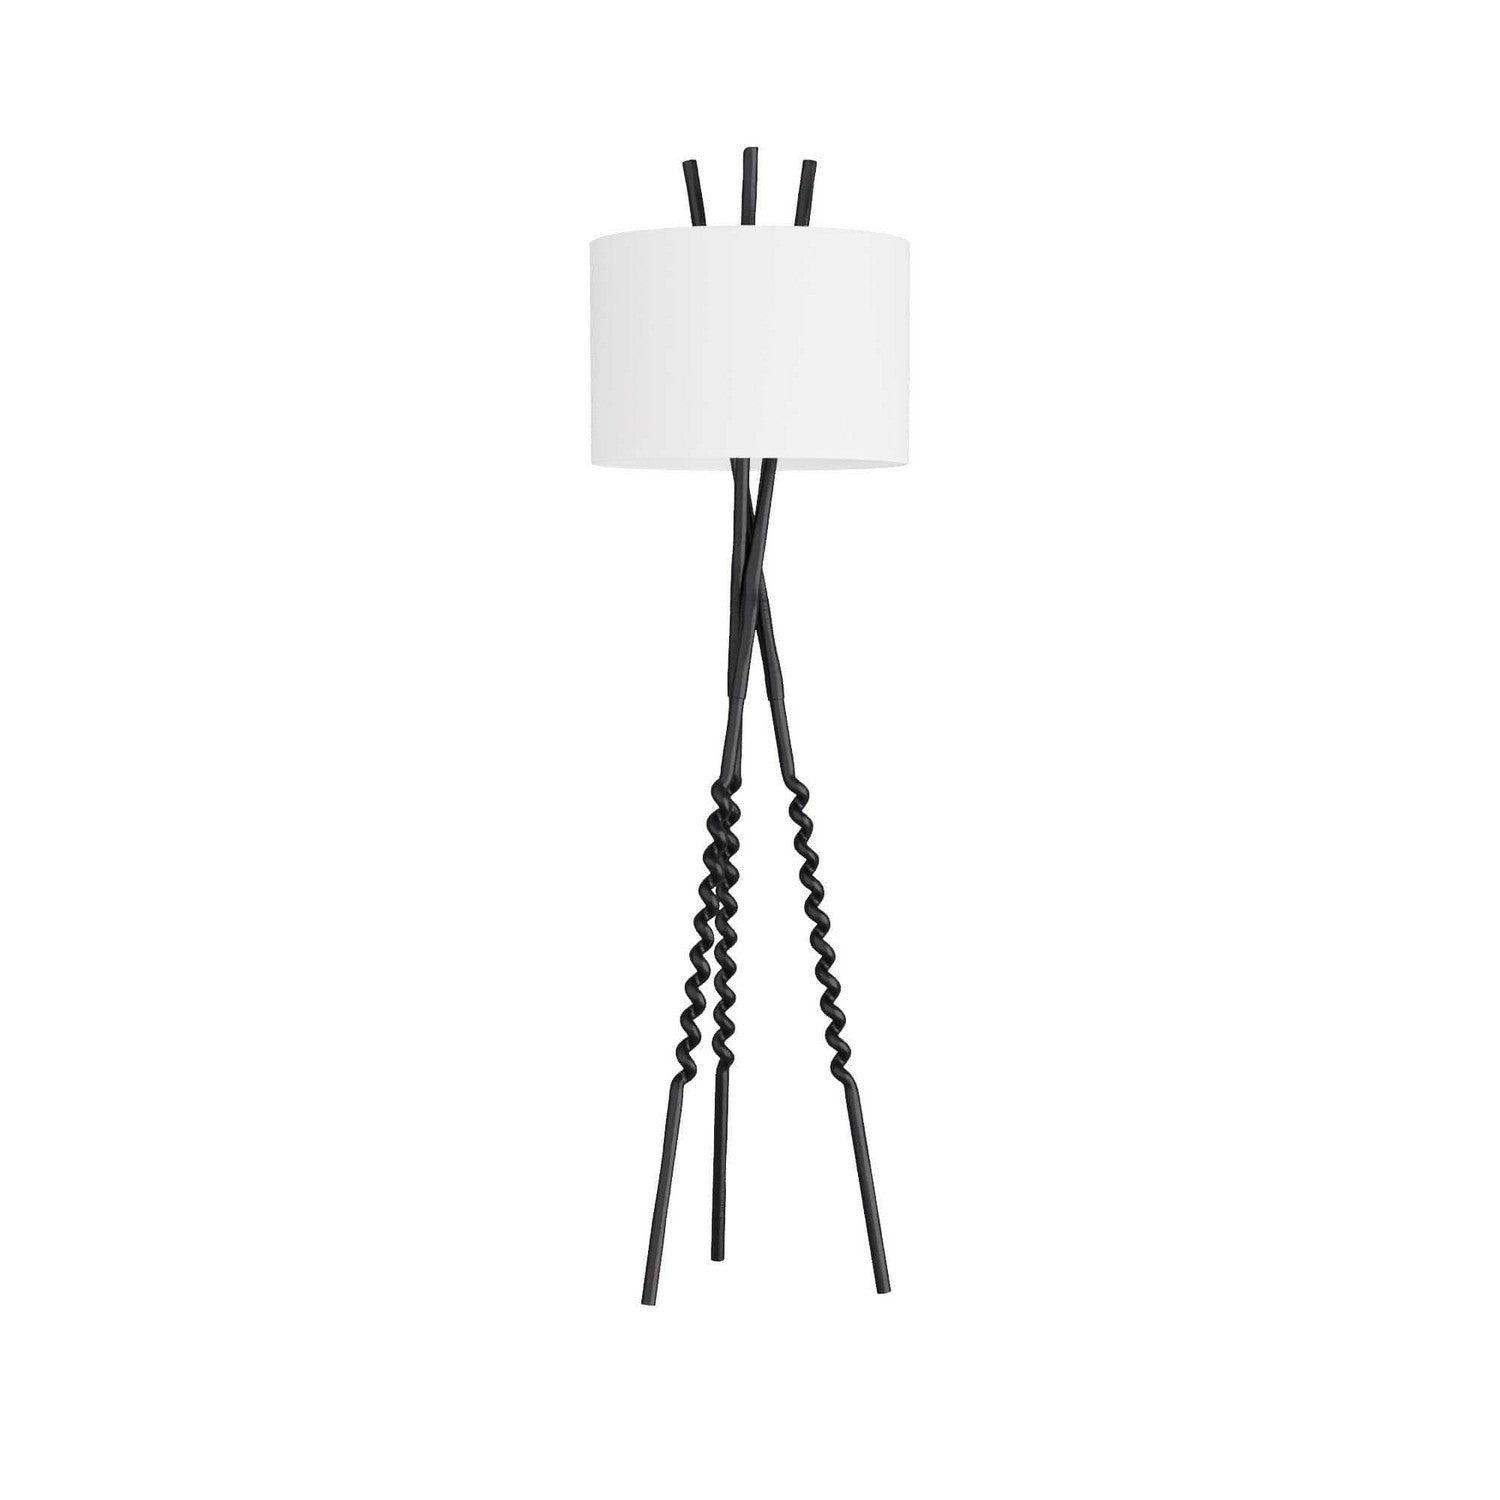 One Light Floor Lamp from the Shepherd's collection in Blackened Bronze finish